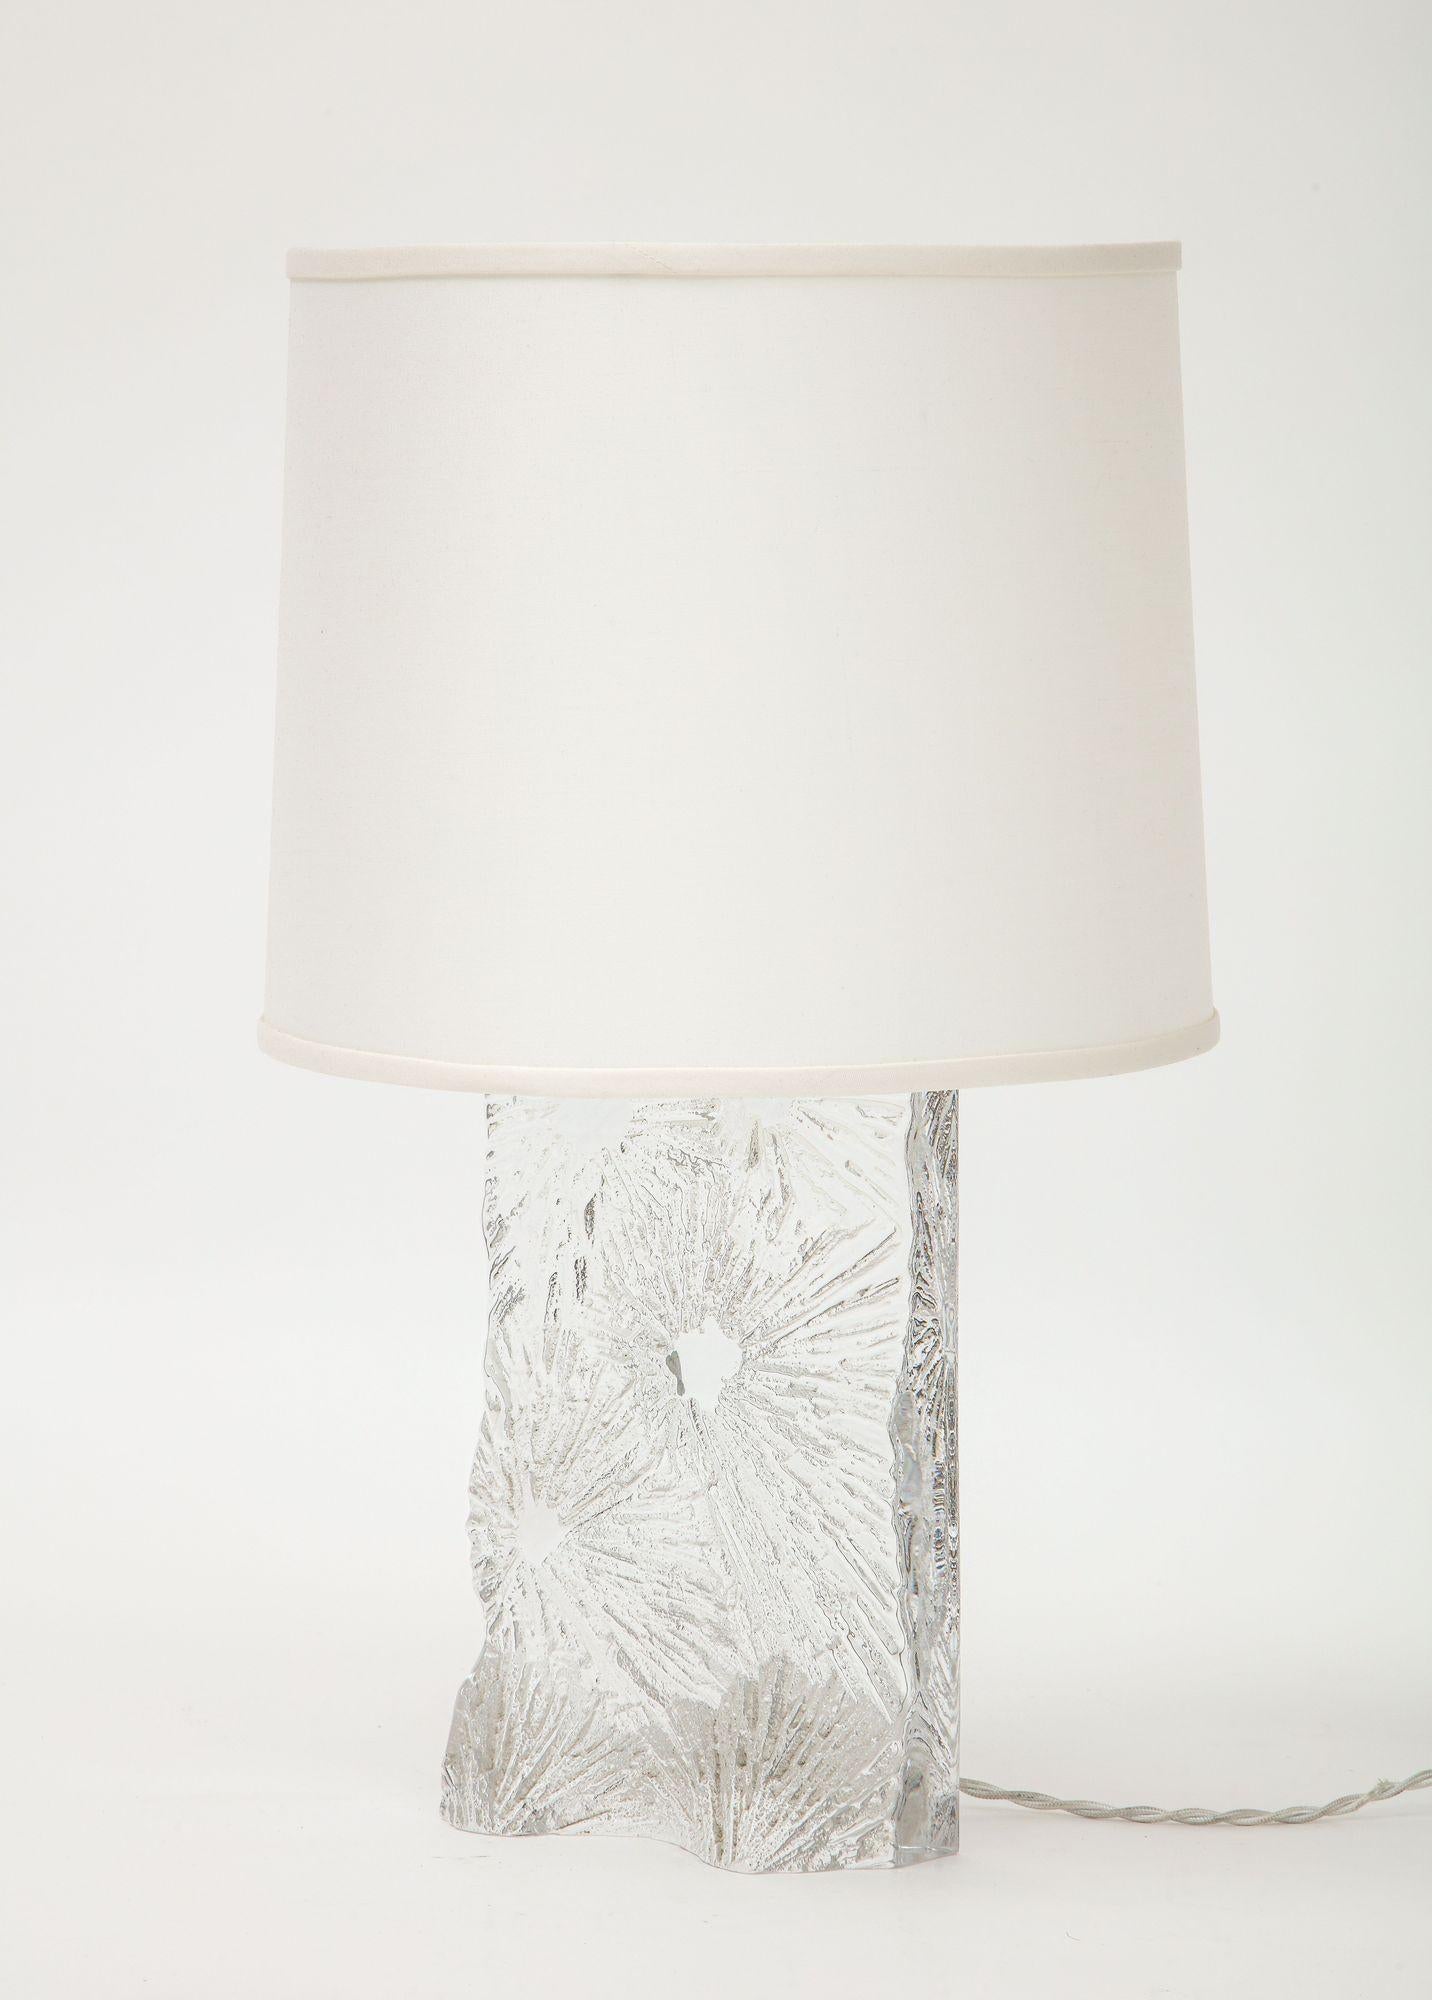 A great Crystal table lamp by Daum with acid engraved Chardon motif, signed on the bottom.